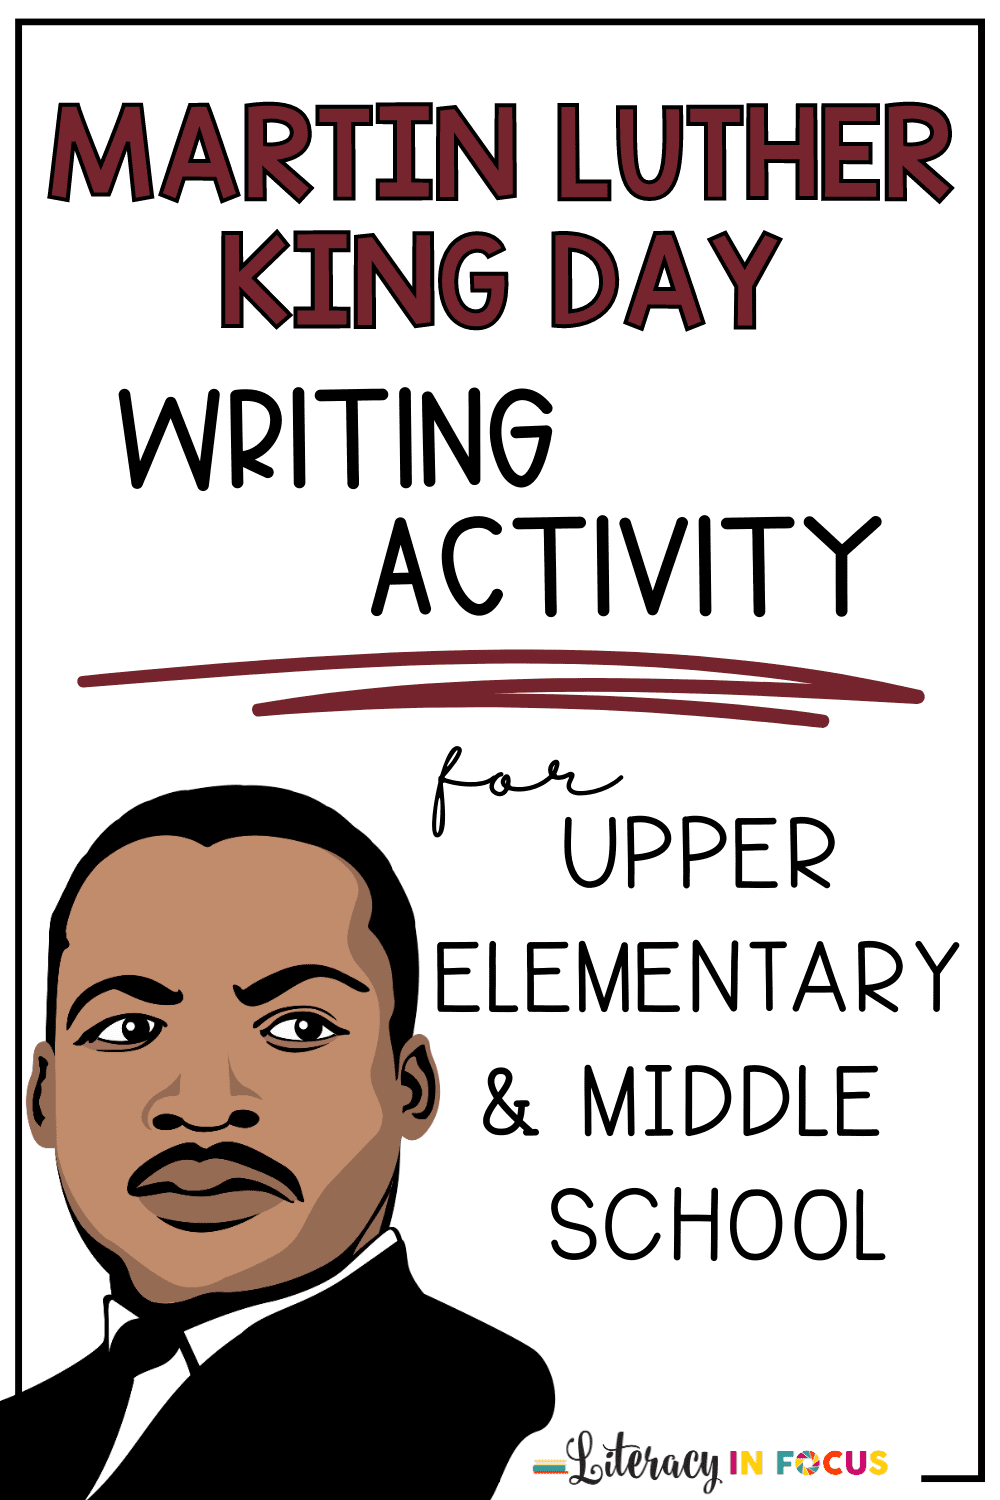 Martin Luther King Day Writing Prompts for Elementary and Middle School